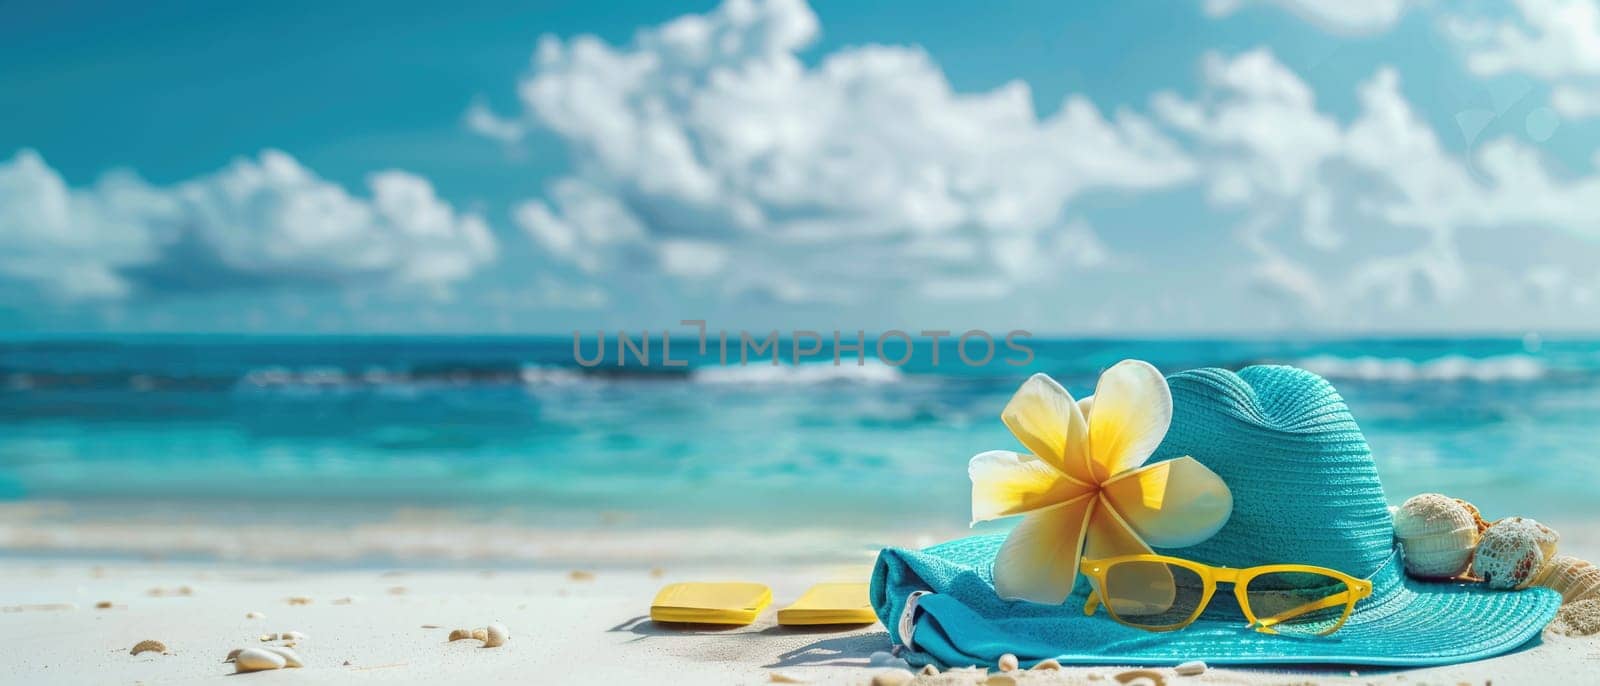 A blue straw hat with a yellow flower on it is on a beach. The hat is placed on a towel and a book is nearby. The scene is bright and cheerful, with the sun shining down on the beach